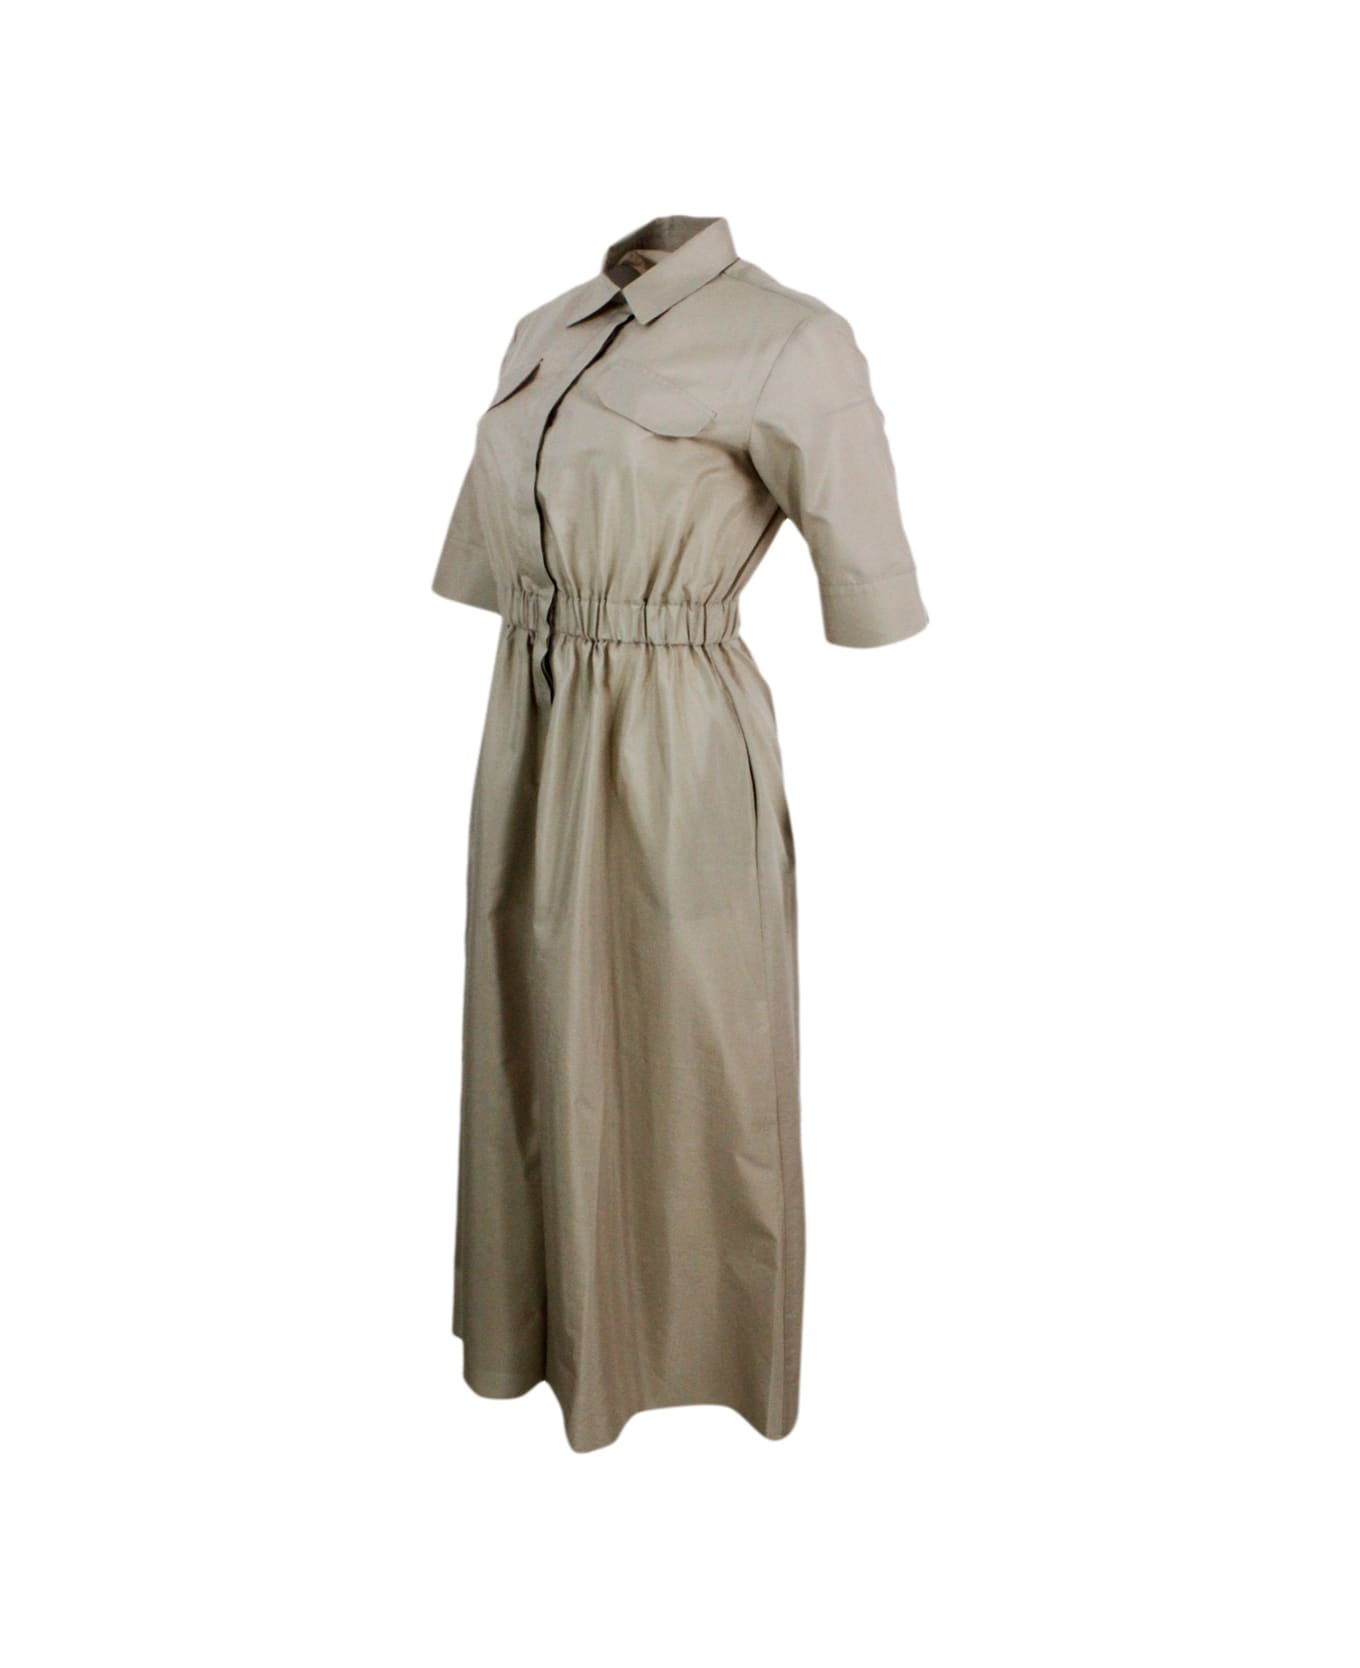 Barba Napoli Long Dress Made Of Cotton With Short Sleeves, With Elastic Waist And Button Closure. Welt Pockets - Beige